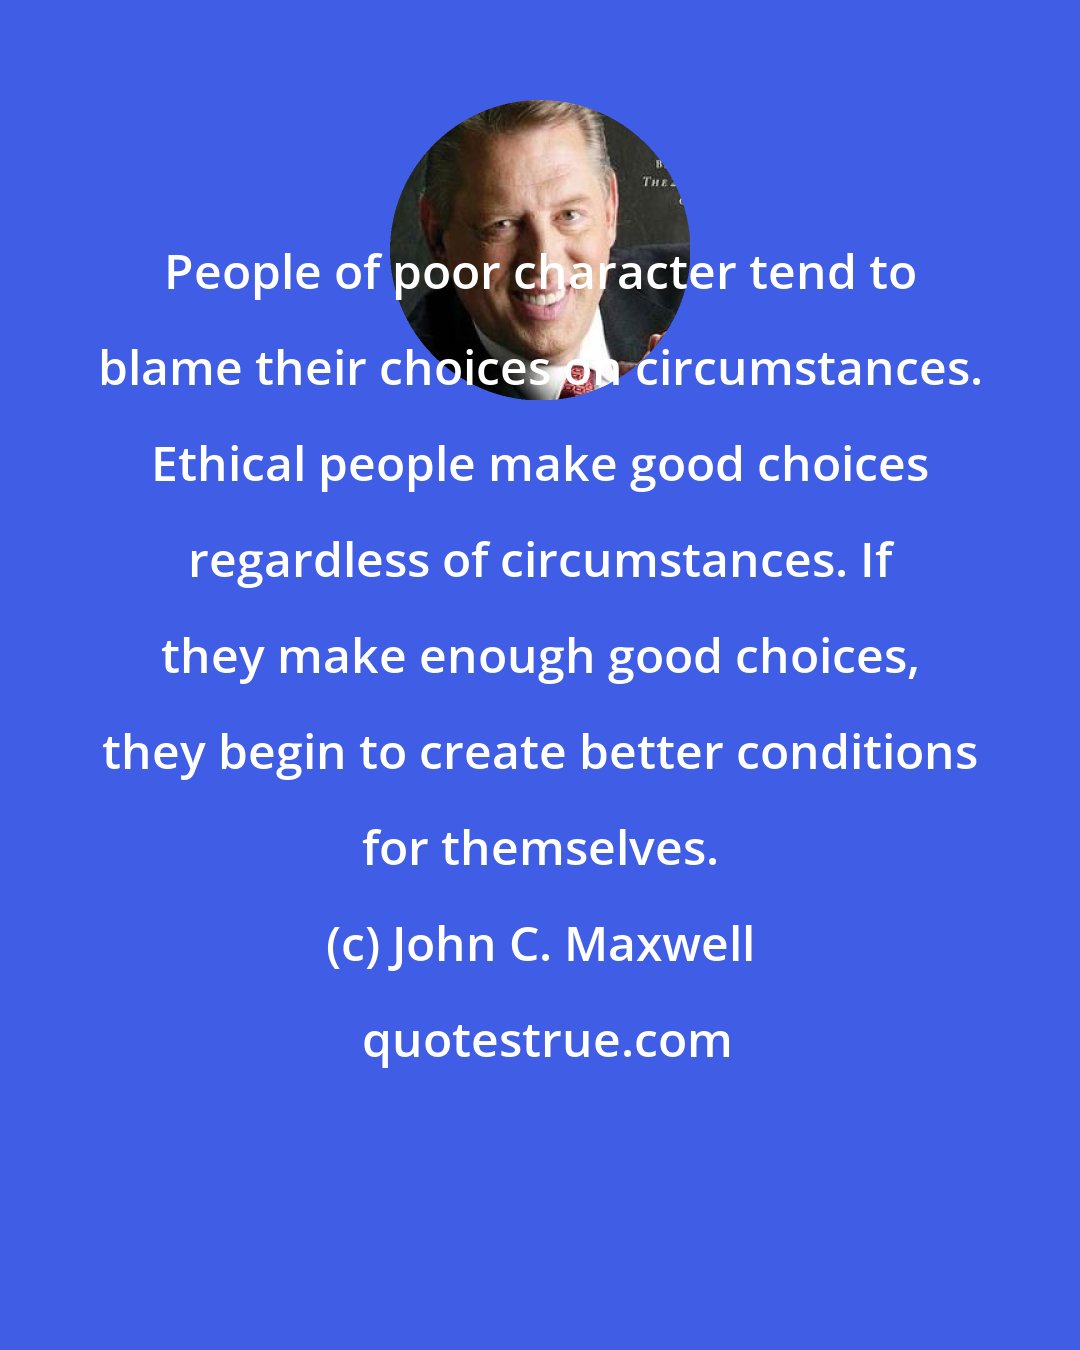 John C. Maxwell: People of poor character tend to blame their choices on circumstances. Ethical people make good choices regardless of circumstances. If they make enough good choices, they begin to create better conditions for themselves.